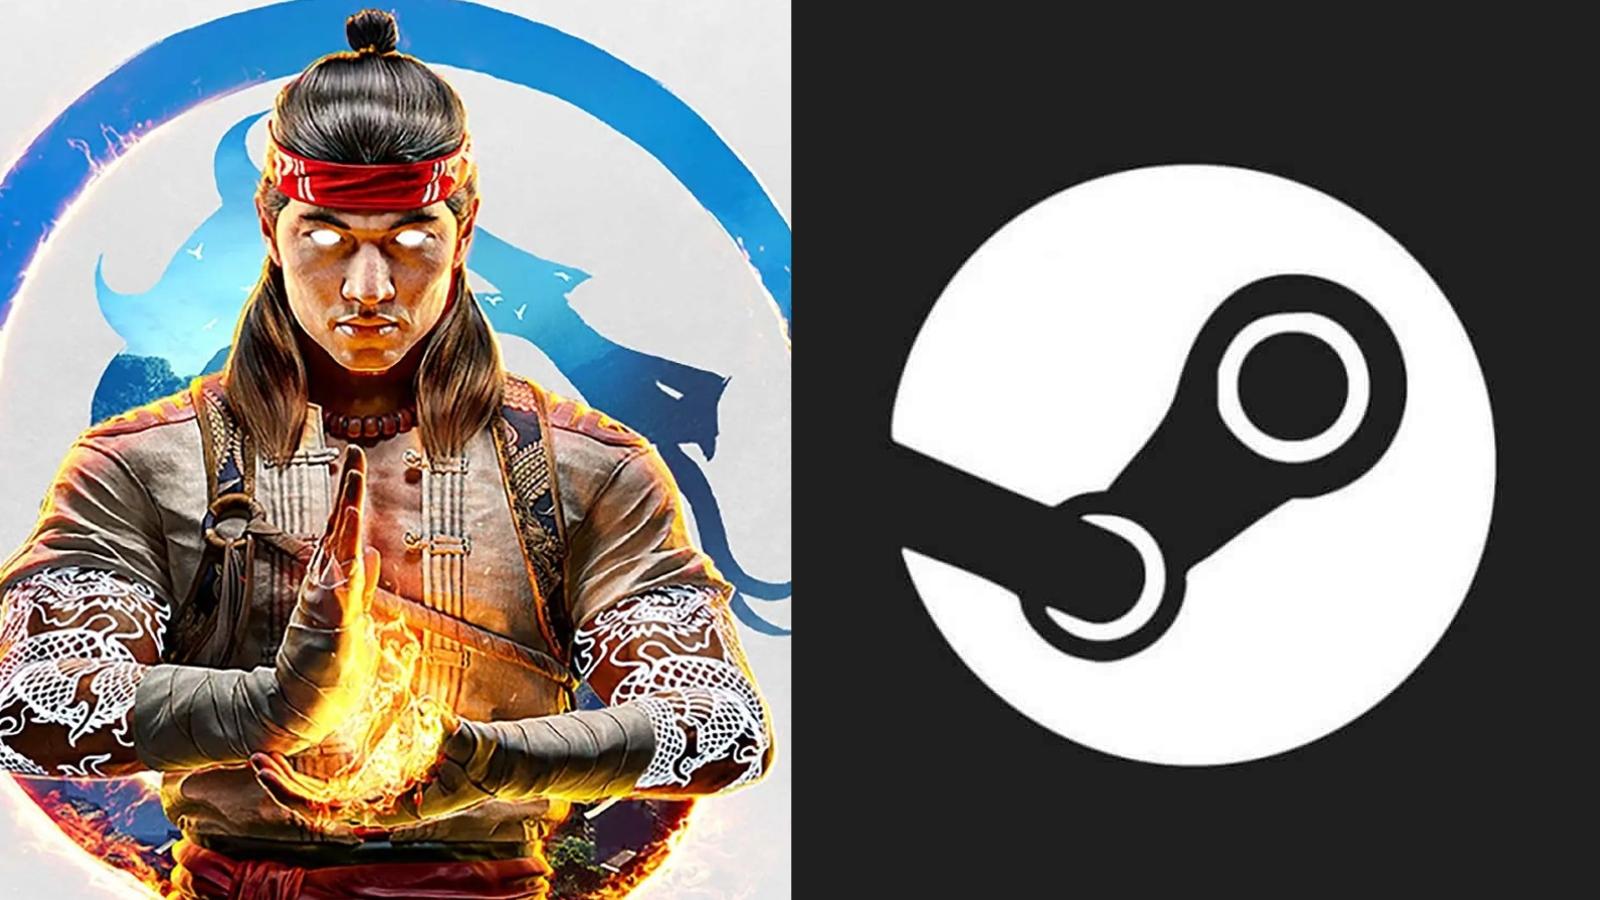 What game is going to be better, Mortal Kombat 1, Street Fighter 6